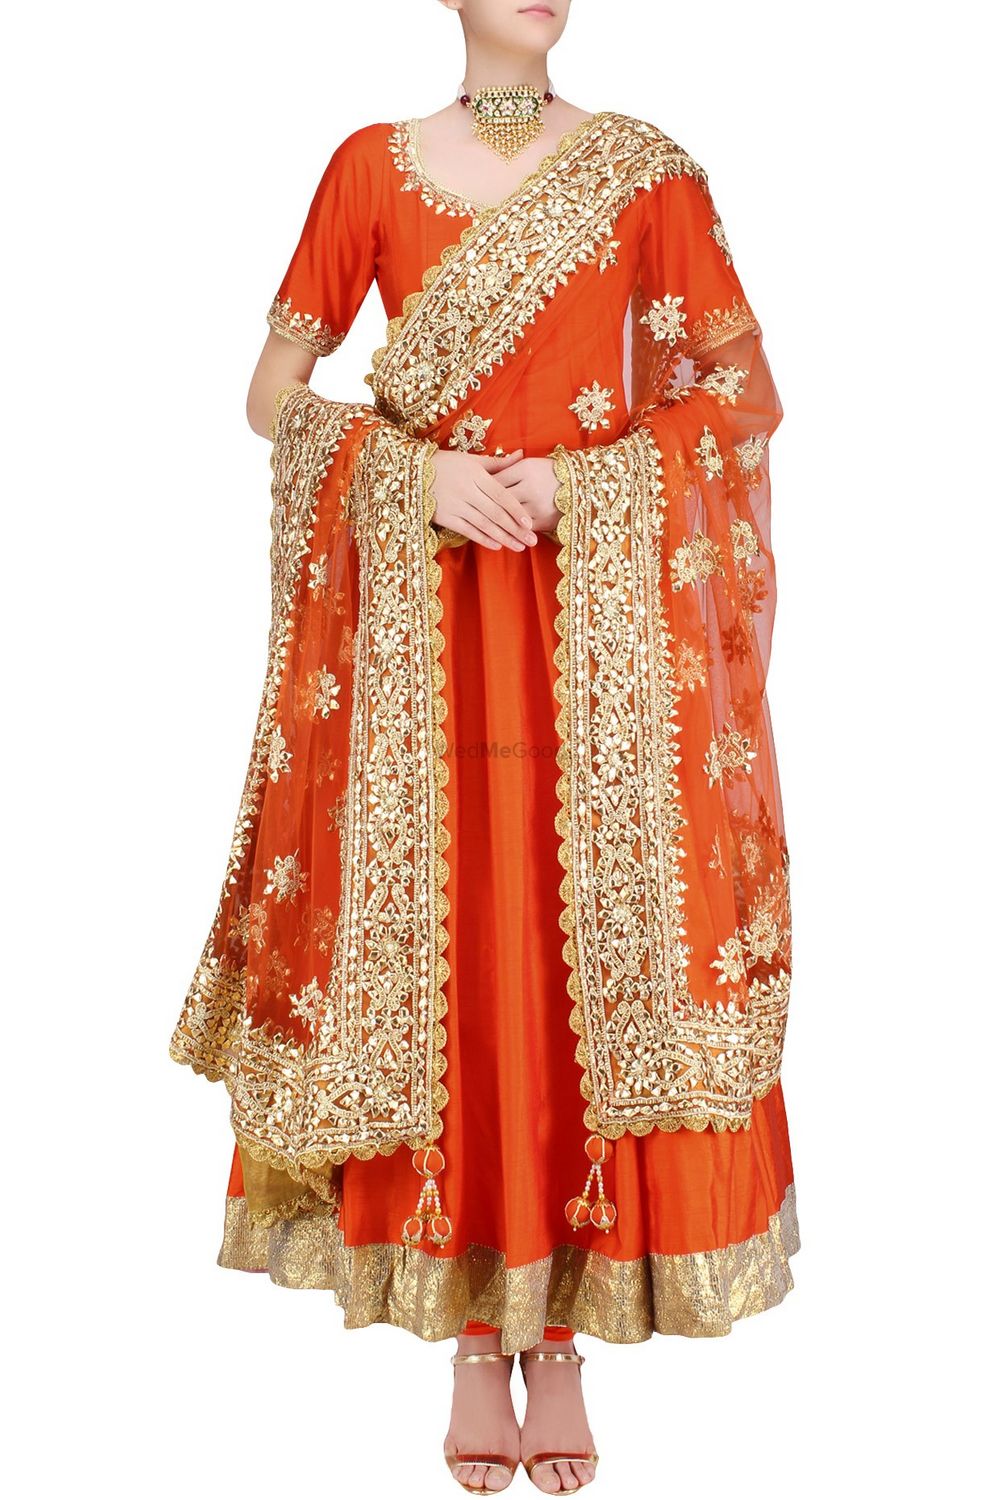 Photo of Orange and gold anarkali for sister of the bride